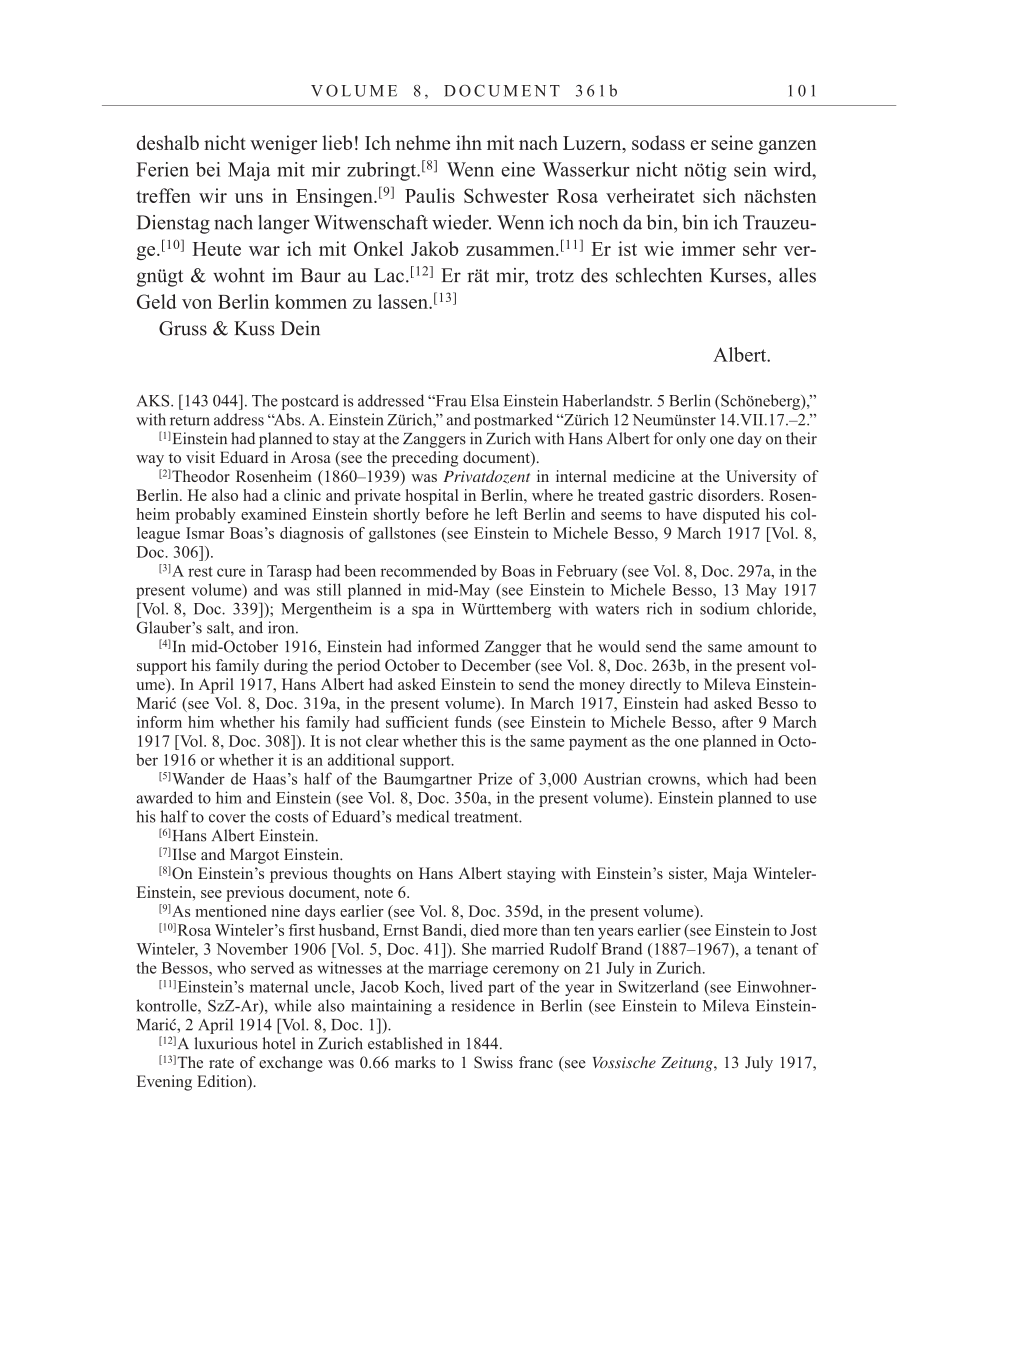 Volume 10: The Berlin Years: Correspondence May-December 1920 / Supplementary Correspondence 1909-1920 page 101